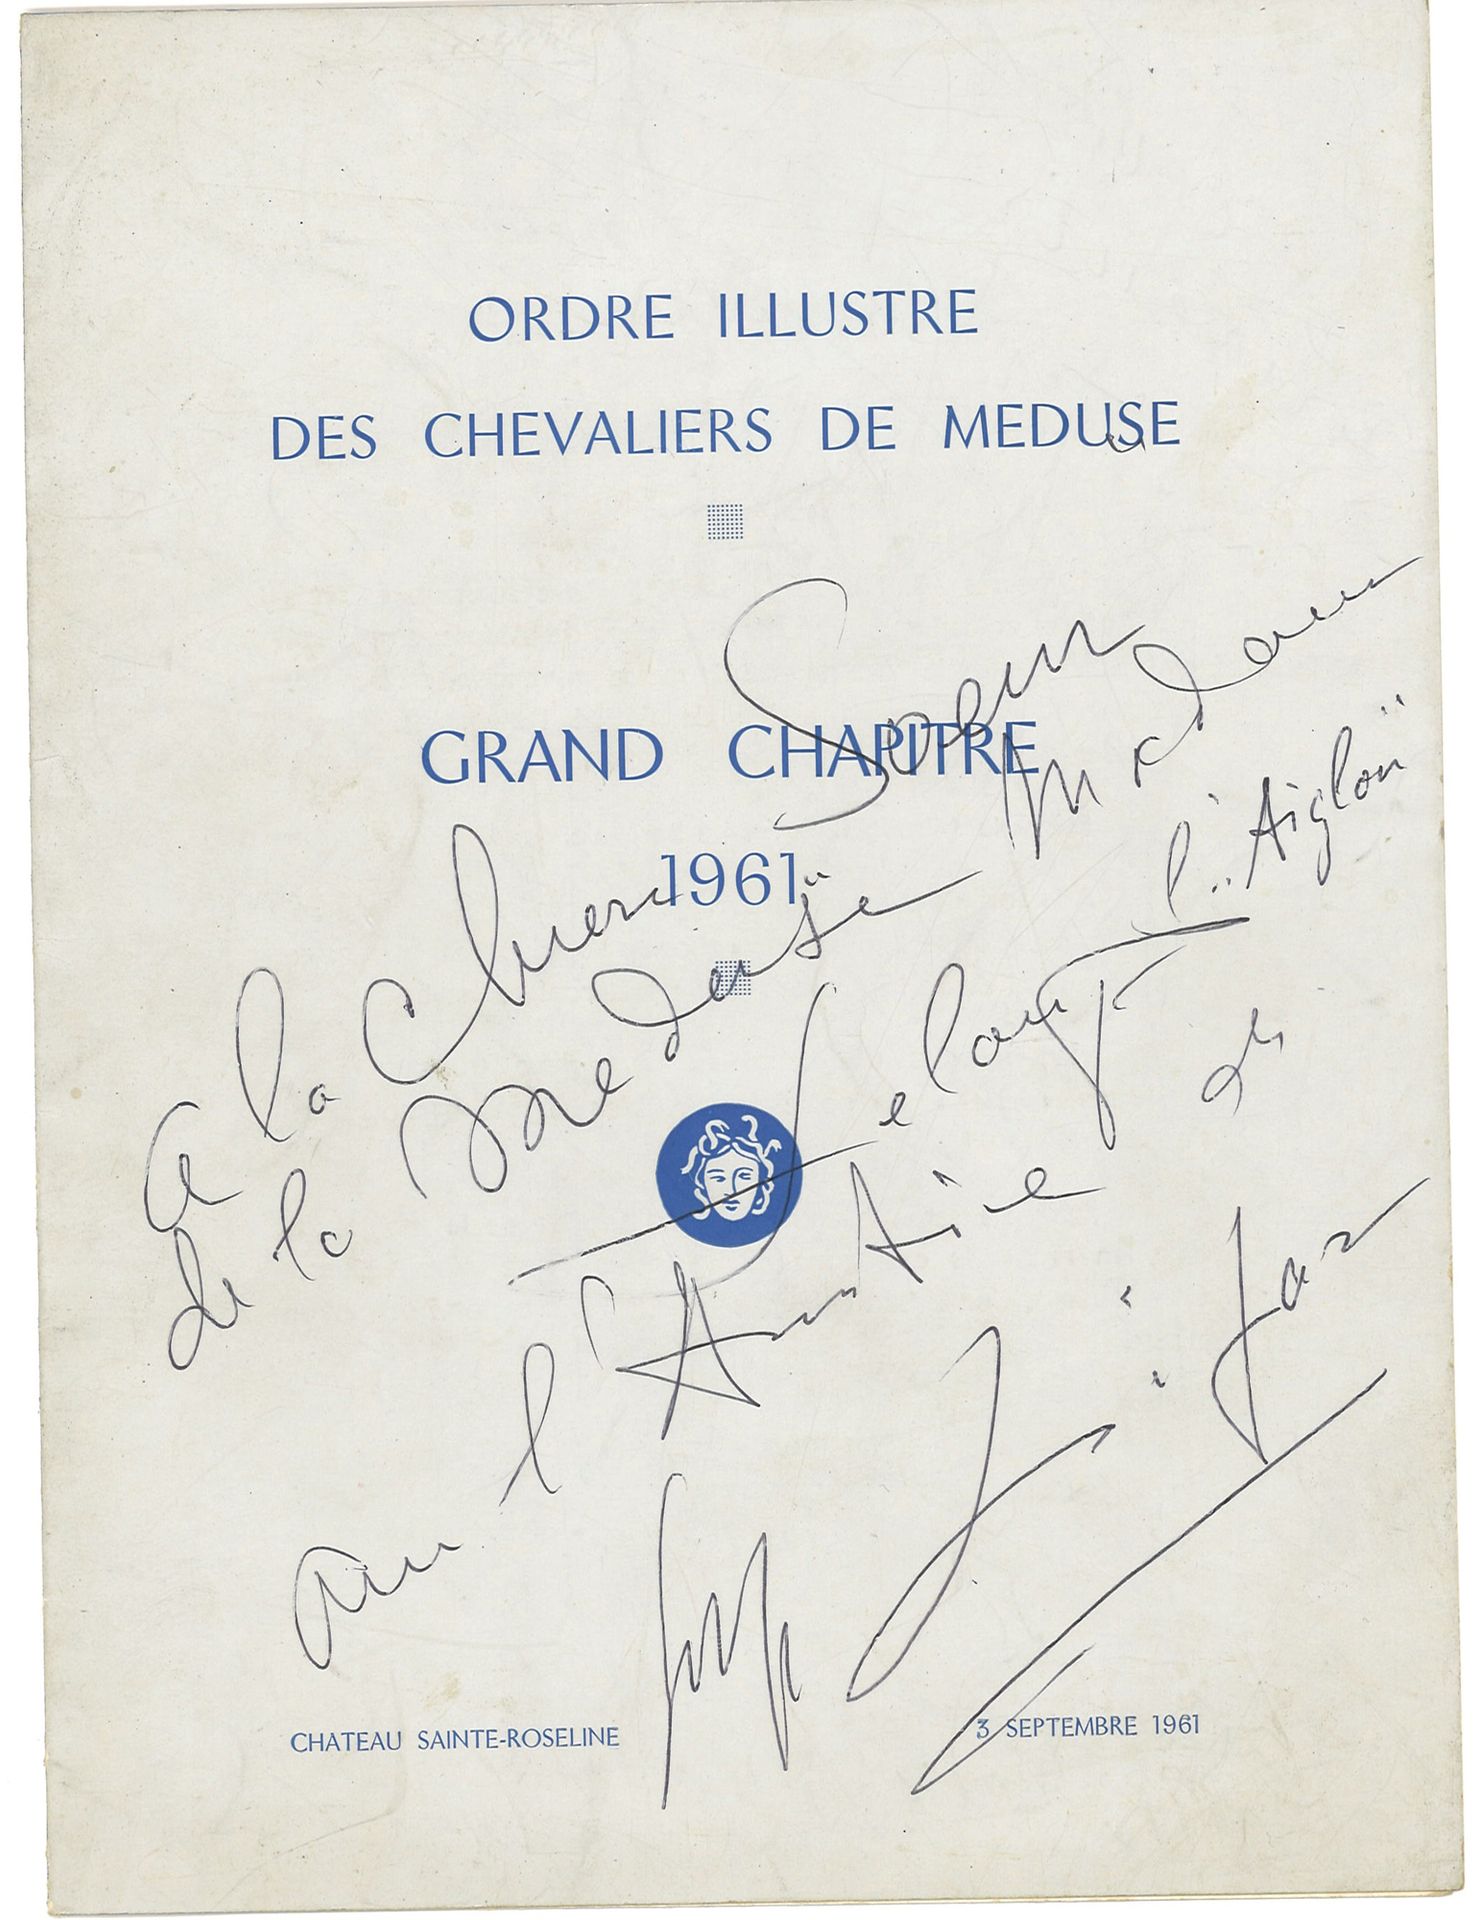 Null LIFAR SERGE (1905-1986) - AUTOGRAPH

Menu for the gala dinner of the illust&hellip;